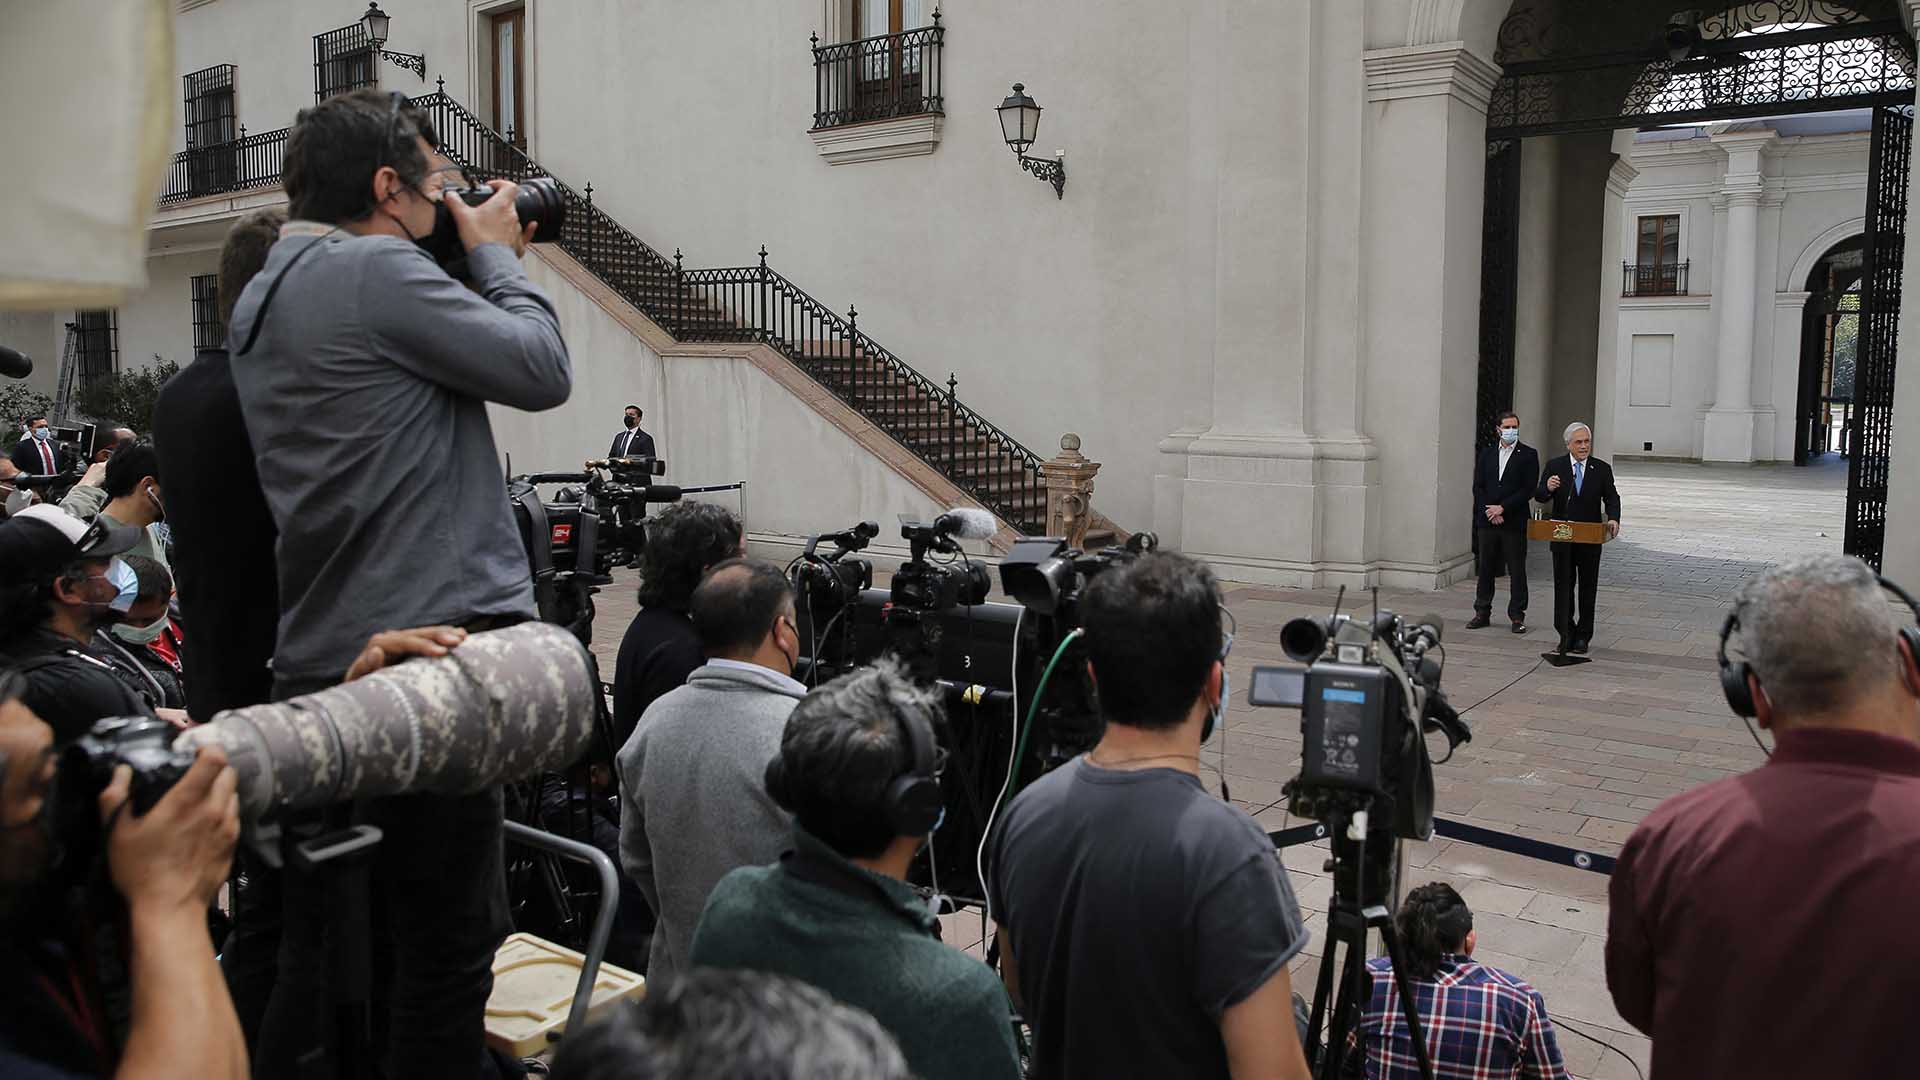 Chilean President Sebastian Pinera offers a press conference, denying any wrongdoing, a day after he was mentioned in the Pandora Papers, at La Moneda presidential palace in Santiago, on October 4, 2021.